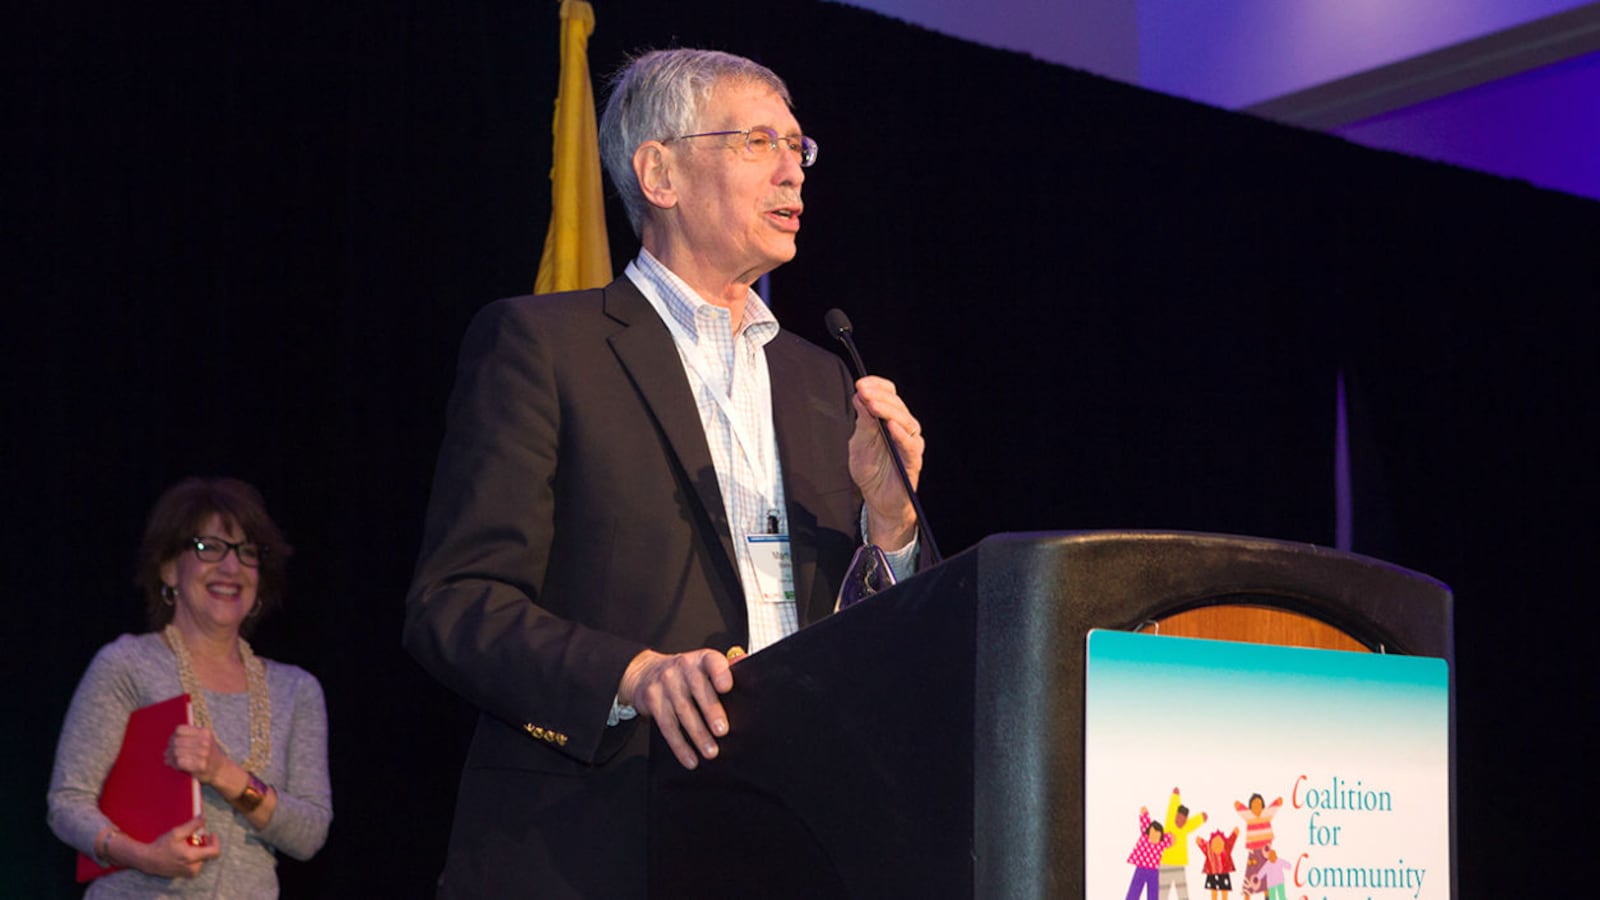 Martin Blank, director of the Coalition for Community Schools, spoke at a national forum in 2016.